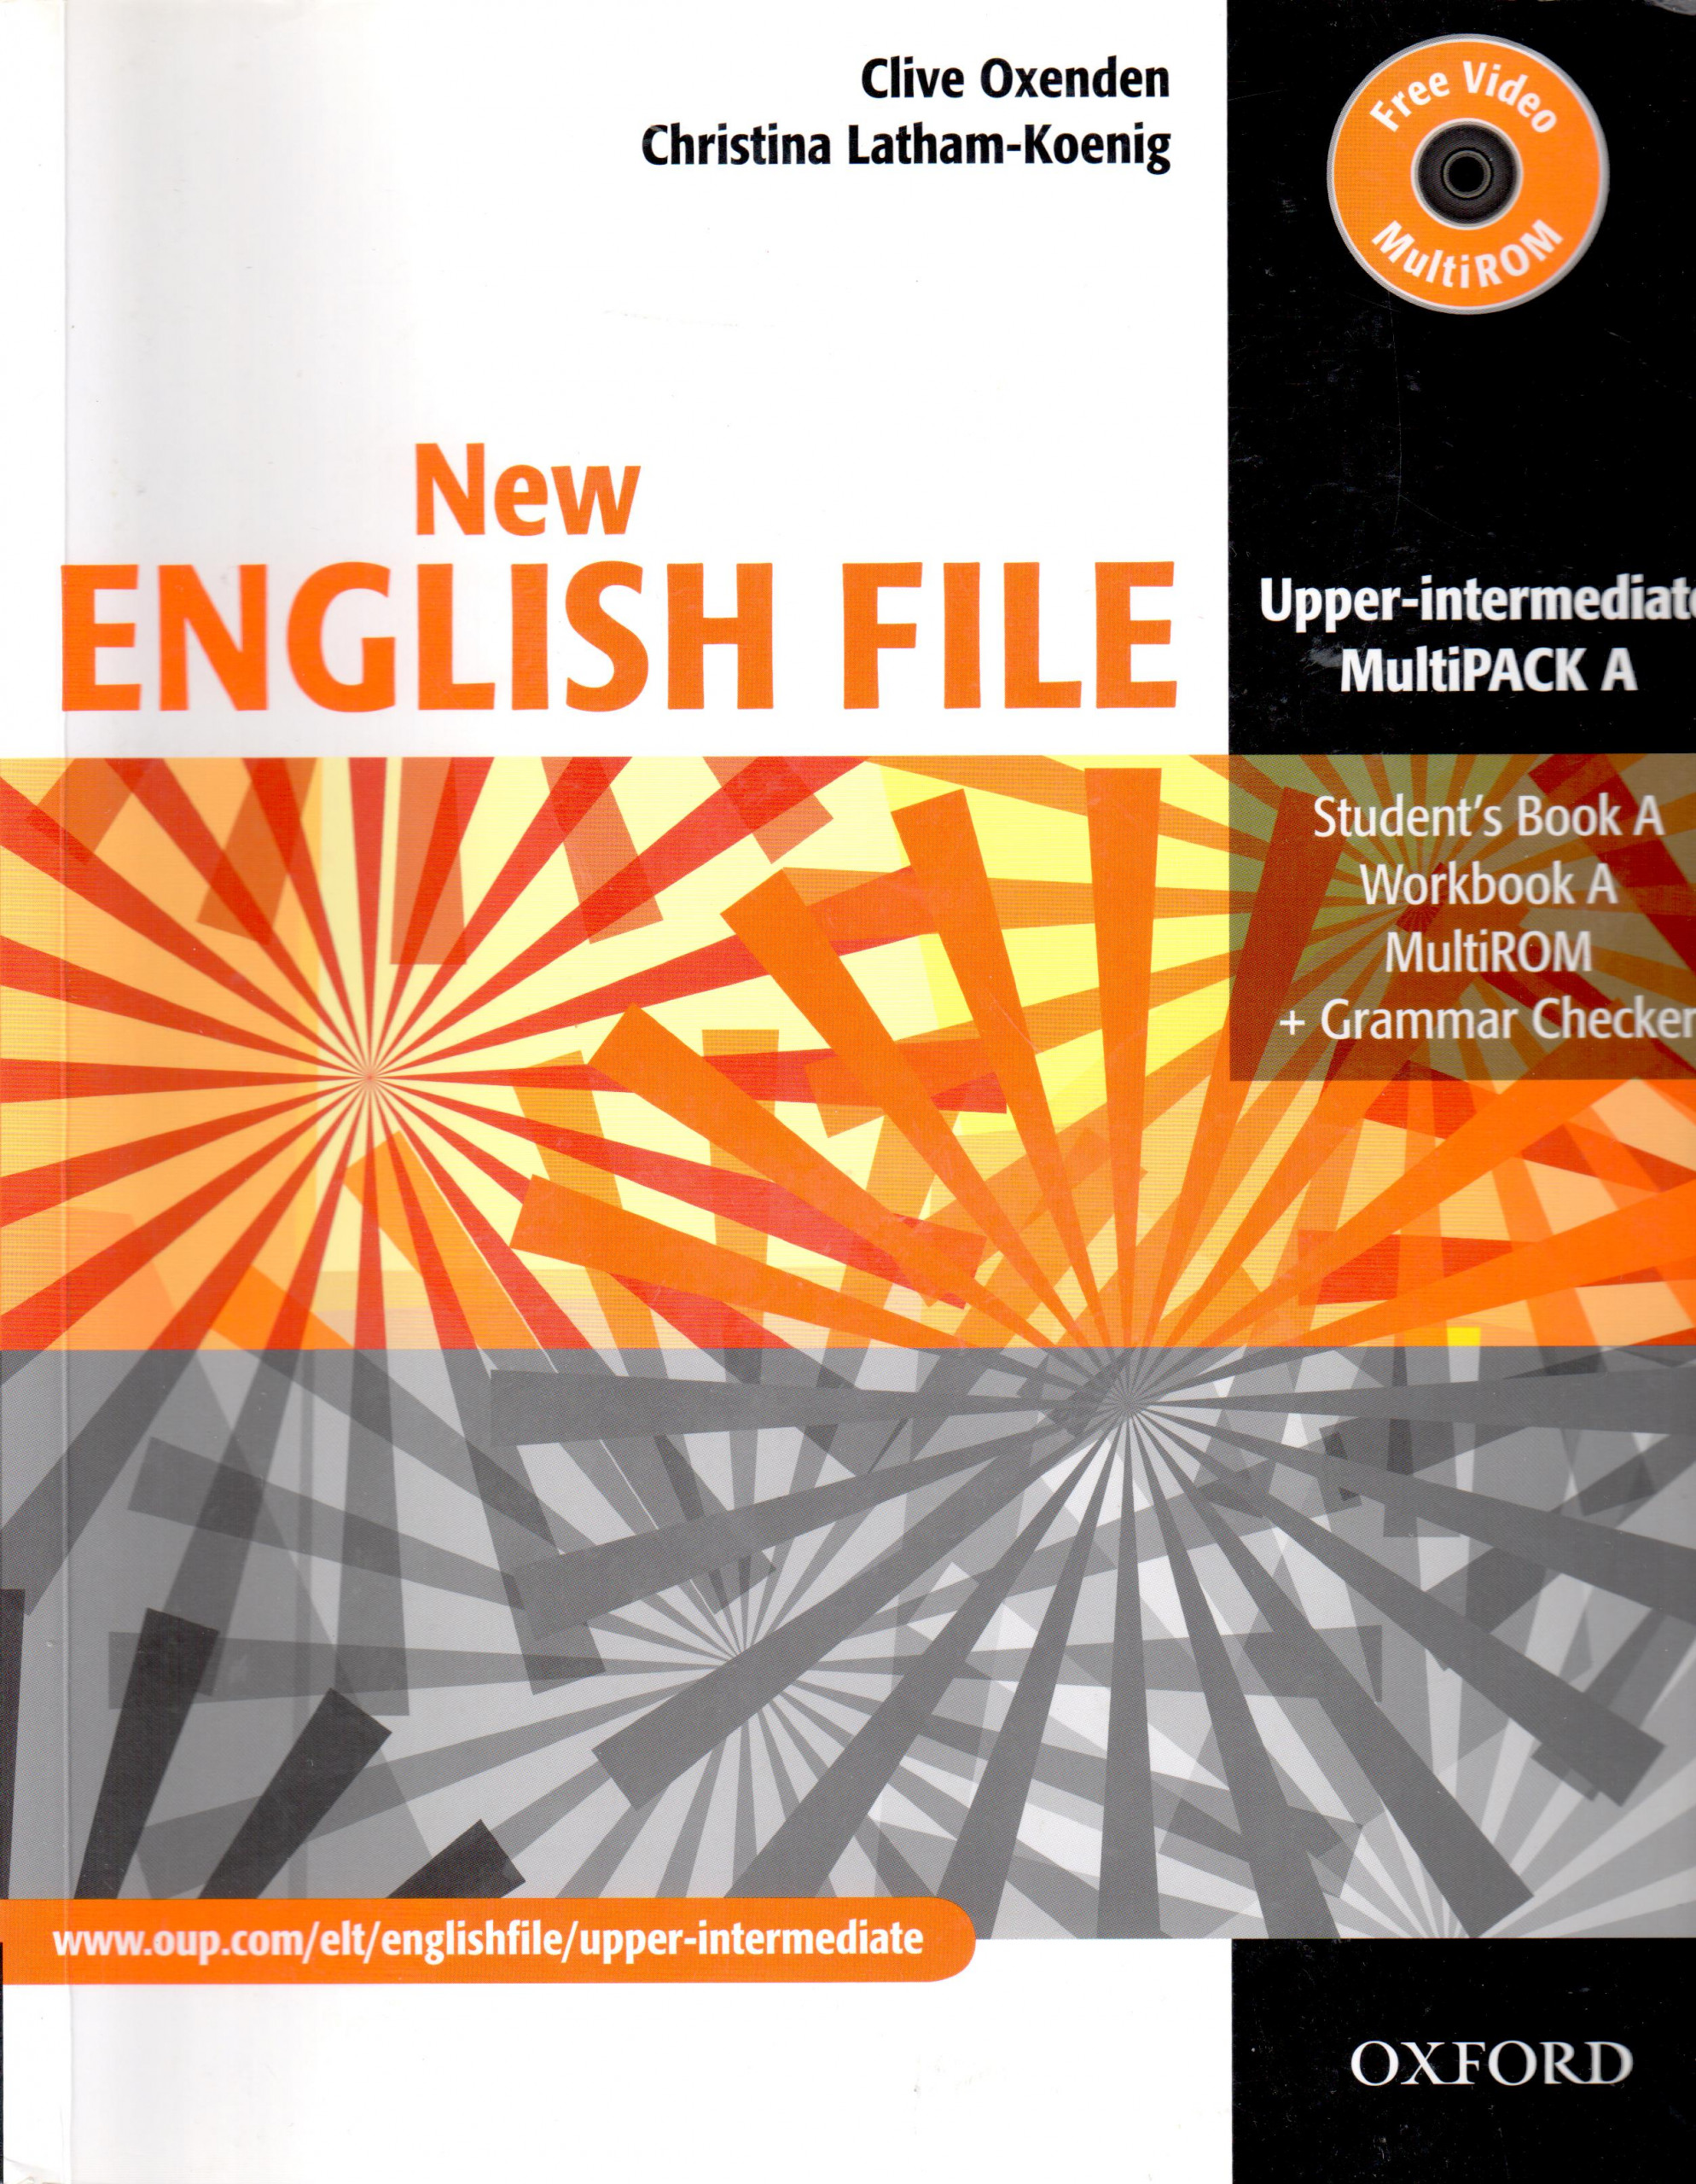 English file upper intermediate tests. New English file Upper Intermediate. English file Upper Intermediate. Clive Oxenden, Christina Latham-Koenig. New English file Intermediate students’ book. Oxford University Press, 2011.. Oxford Upper Intermediate student's book.